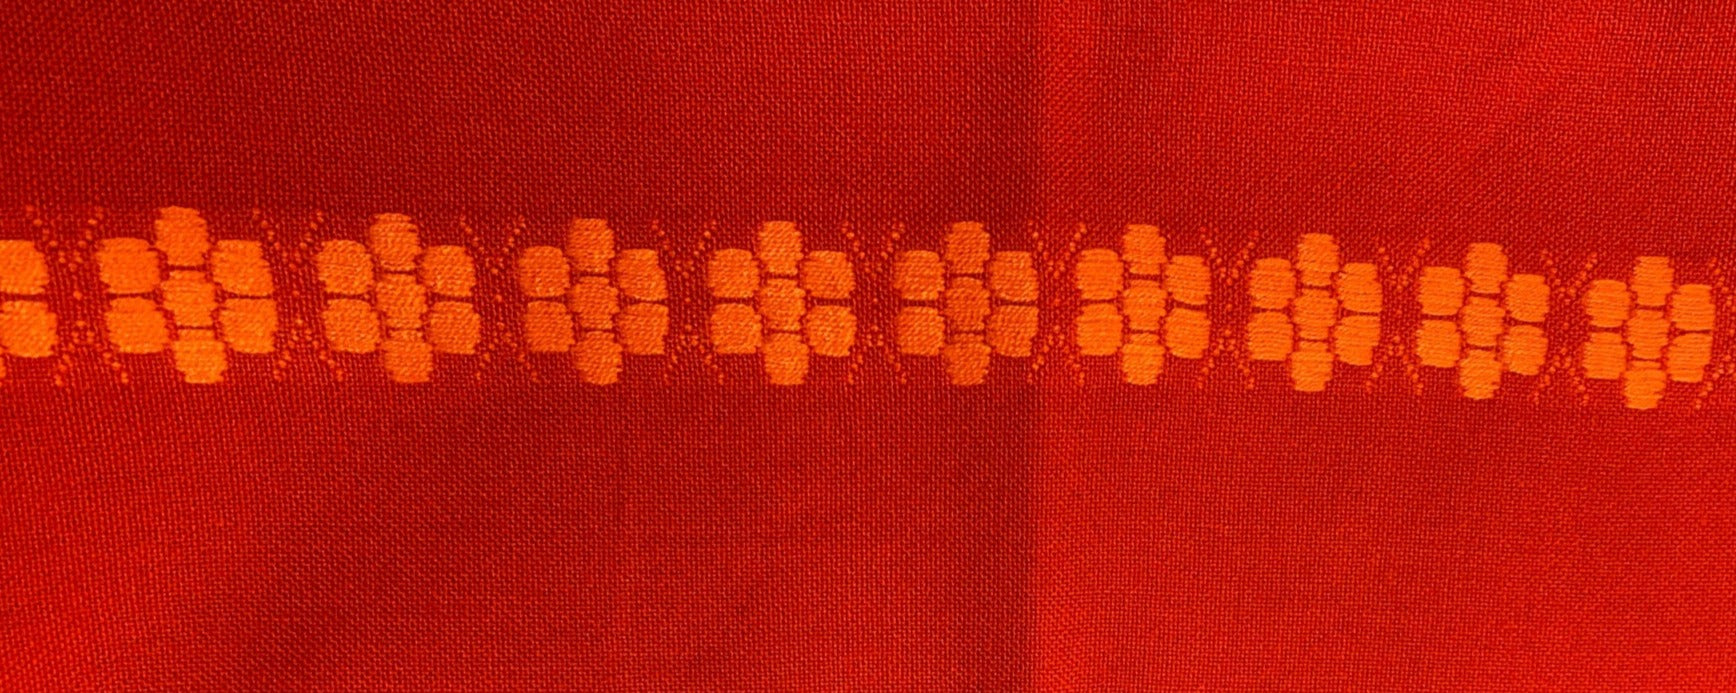 Detail of Fabulous Traditional Red Scandinavian Vintage Handwoven Tablecloth - Cook Street Vintage